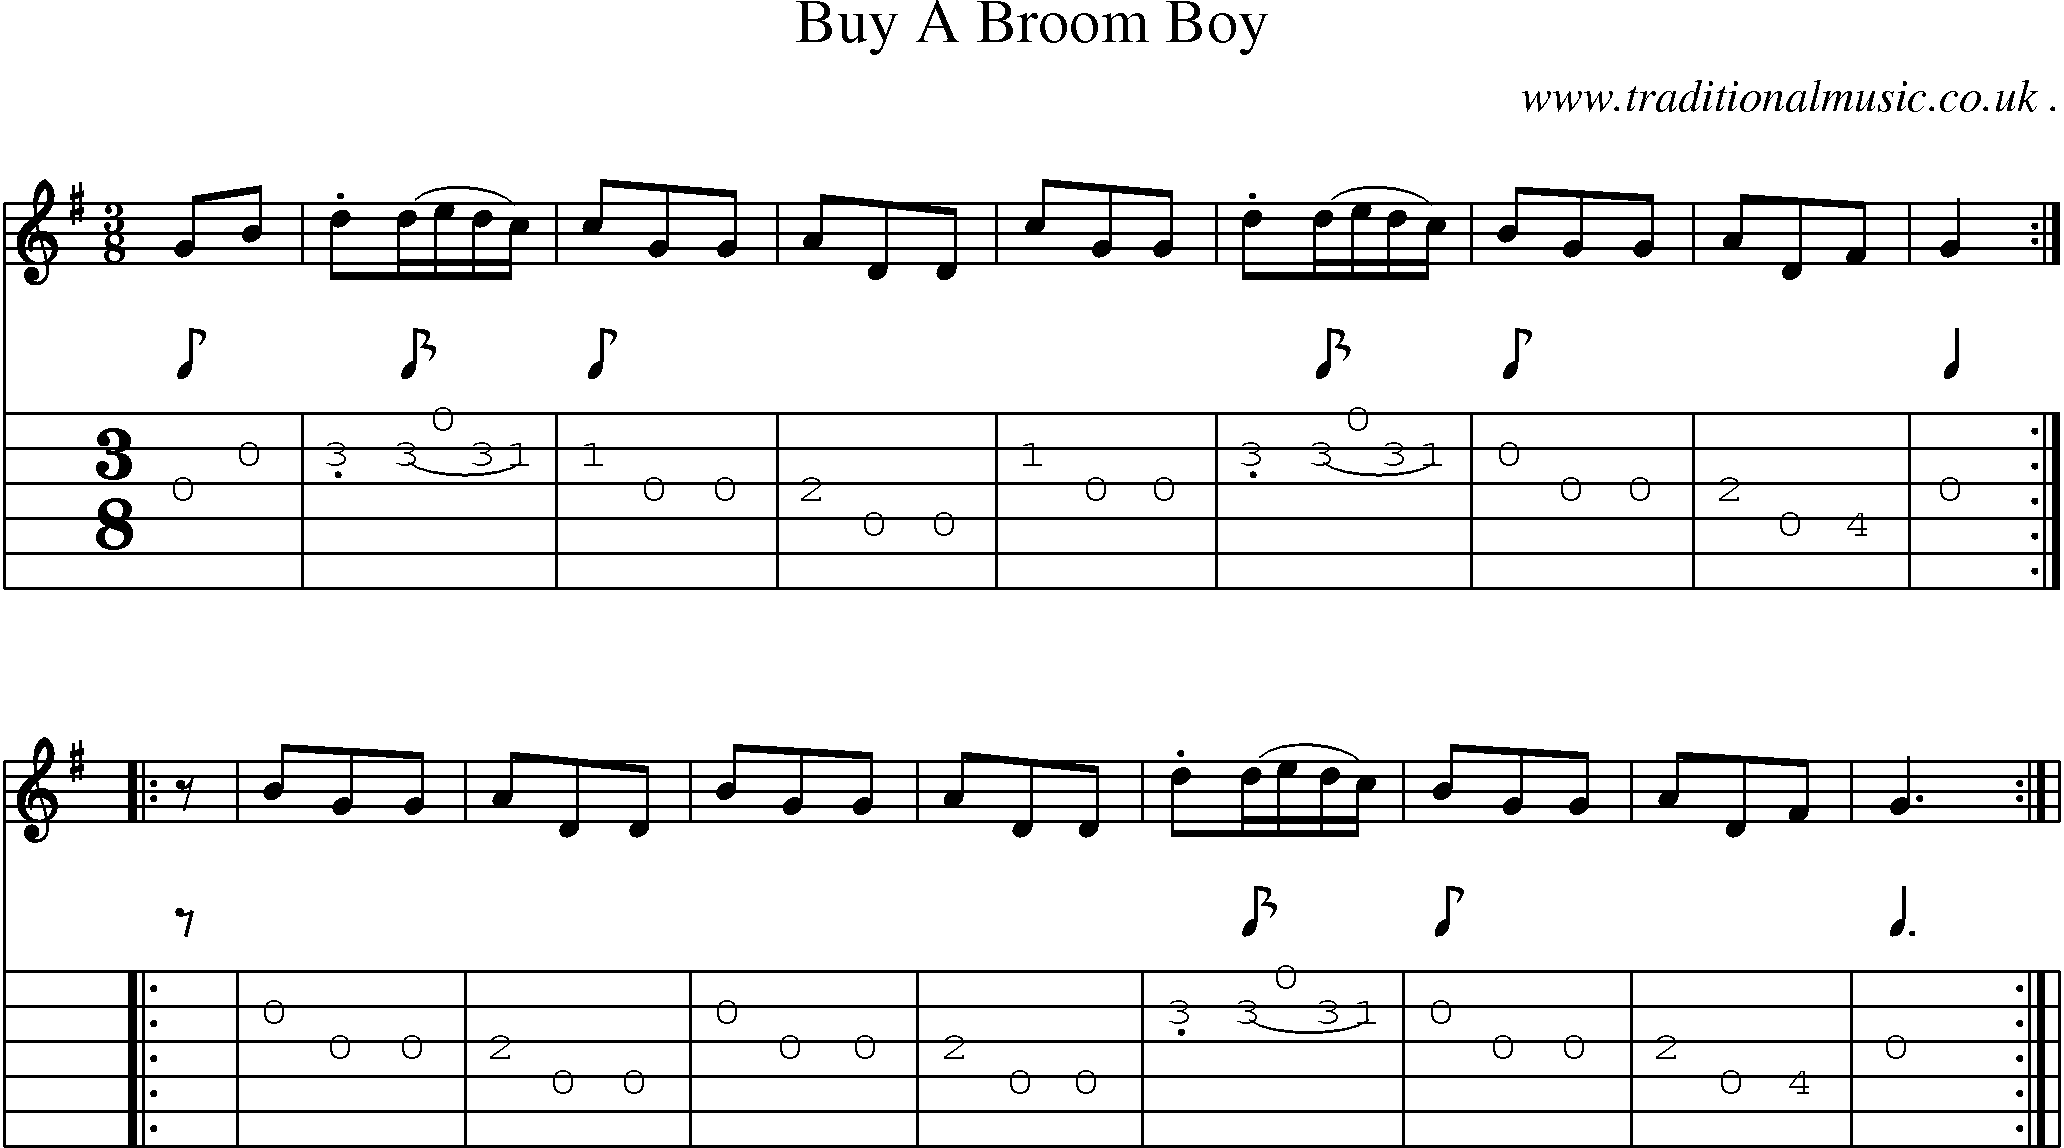 Sheet-Music and Guitar Tabs for Buy A Broom Boy